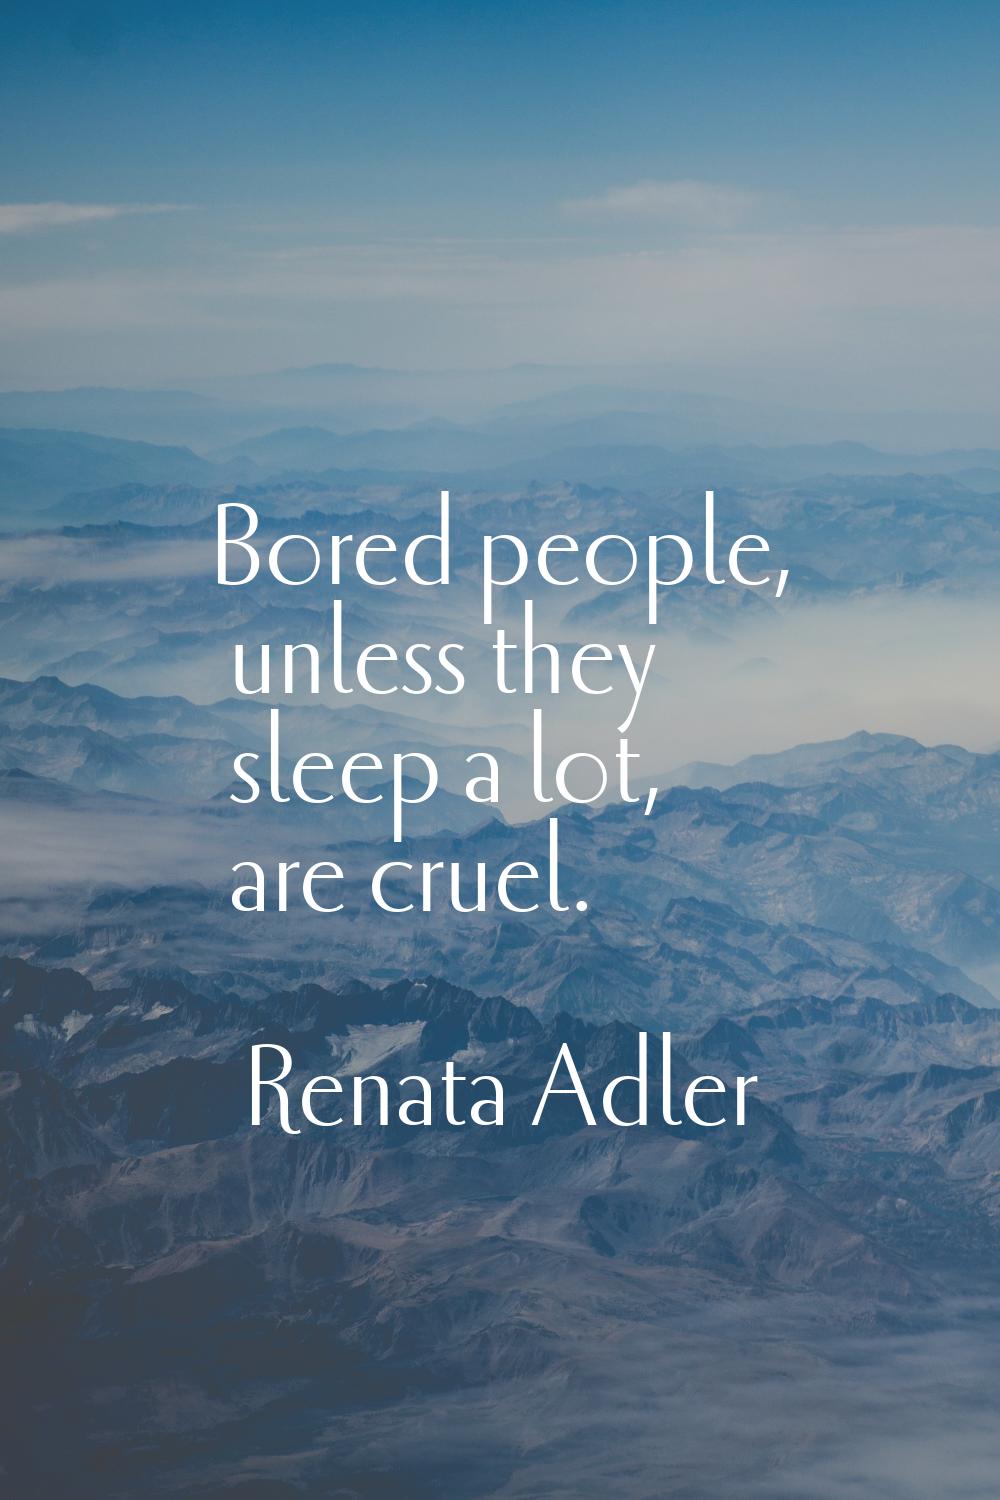 Bored people, unless they sleep a lot, are cruel.